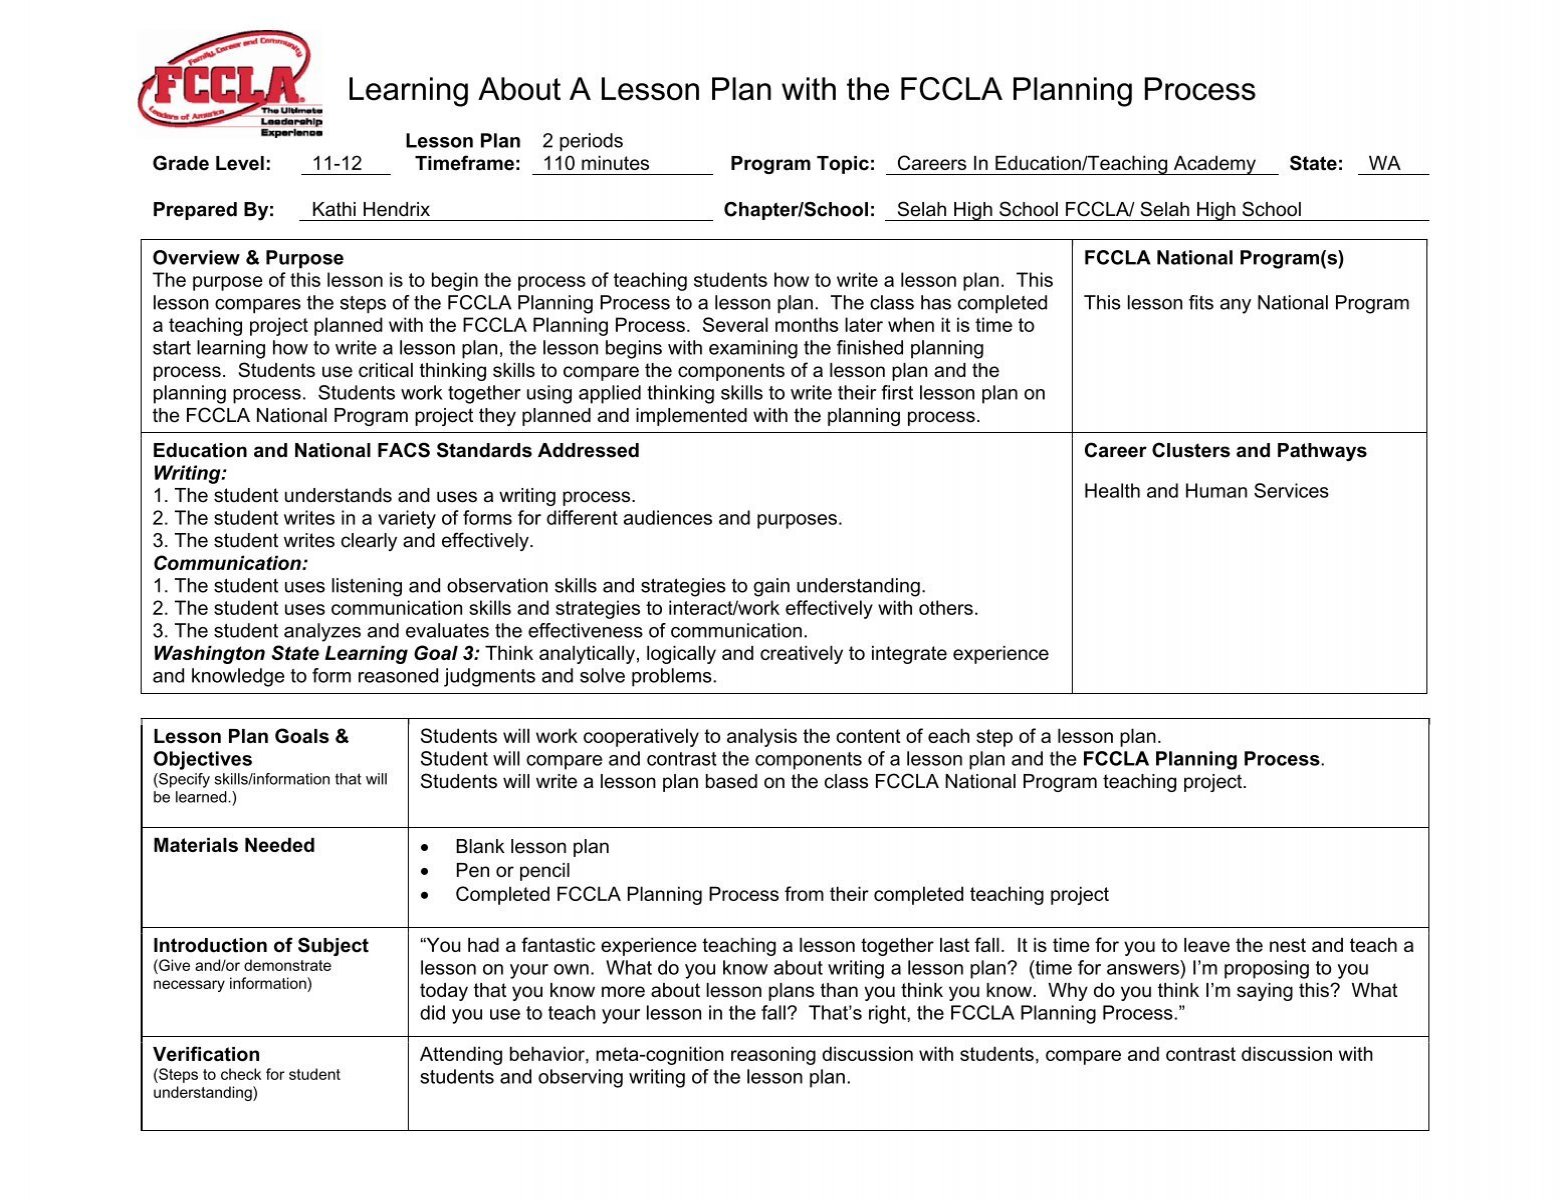 learning-about-a-lesson-plan-with-the-fccla-planning-process